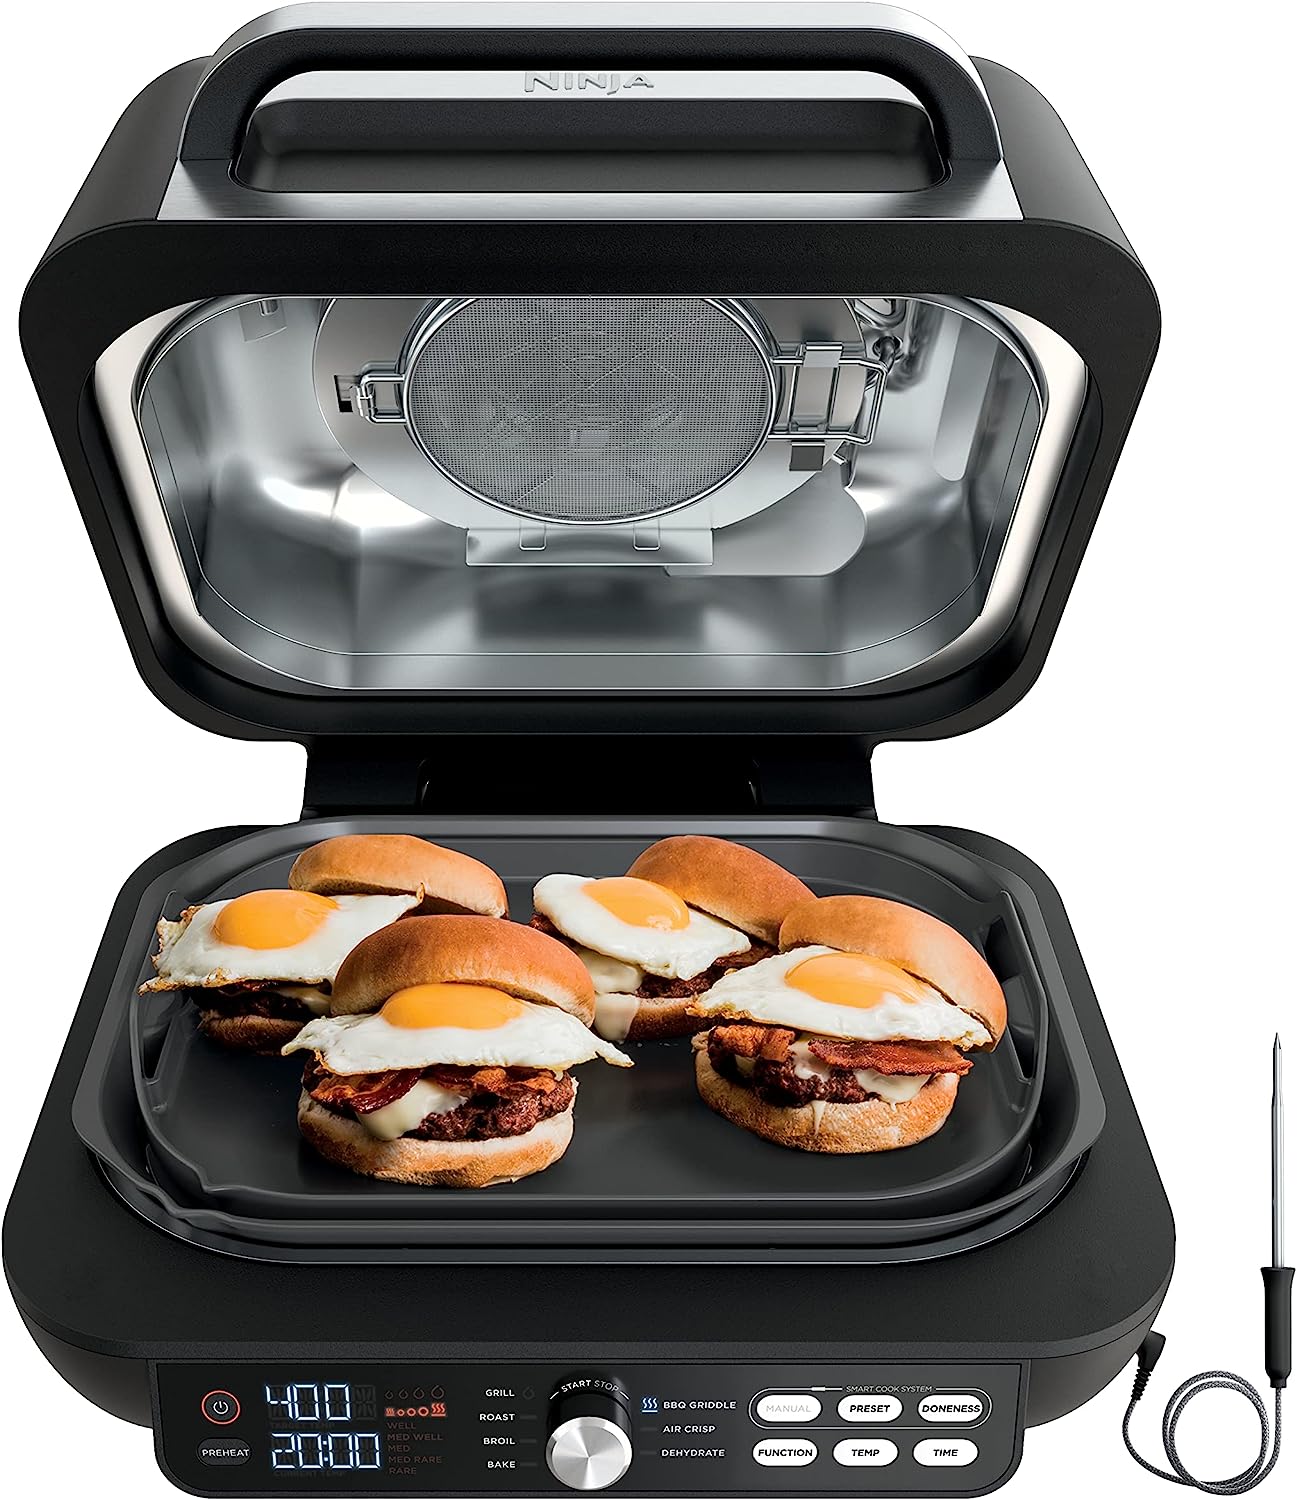 Ninja XL Pro 7-in-1 Indoor Grill/Griddle - $205.99 - Free shipping for Prime members - $205.99 Woot!